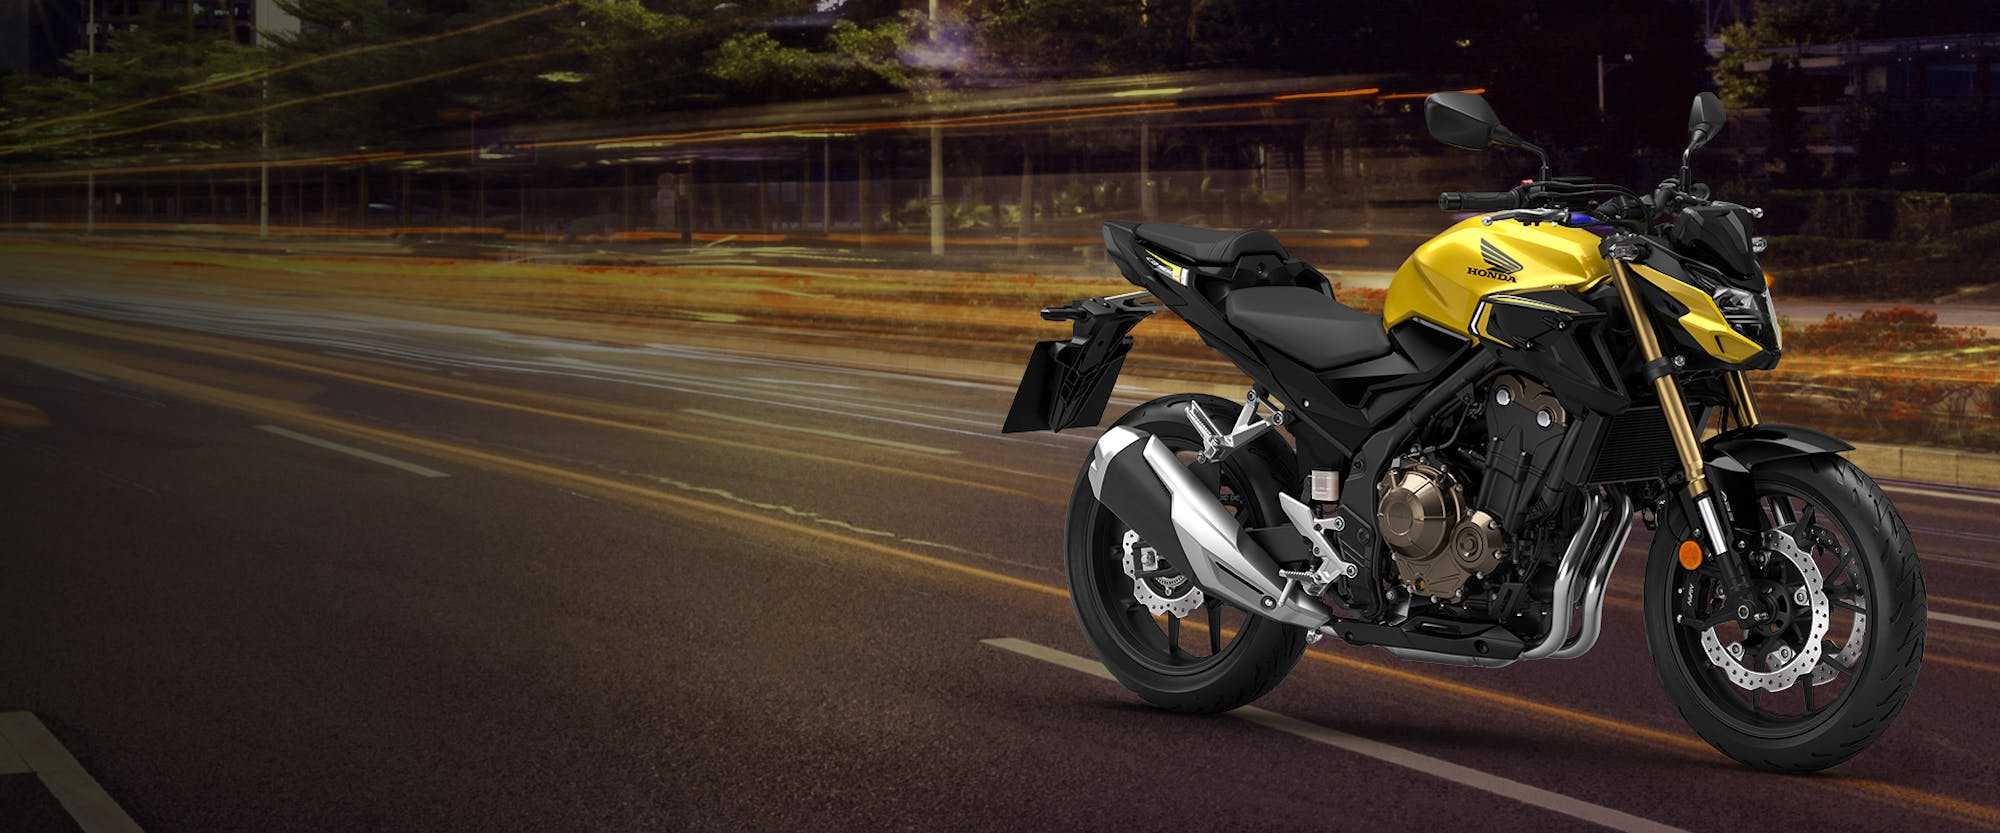 Honda CB500F in pearl dusk yellow colour, parked